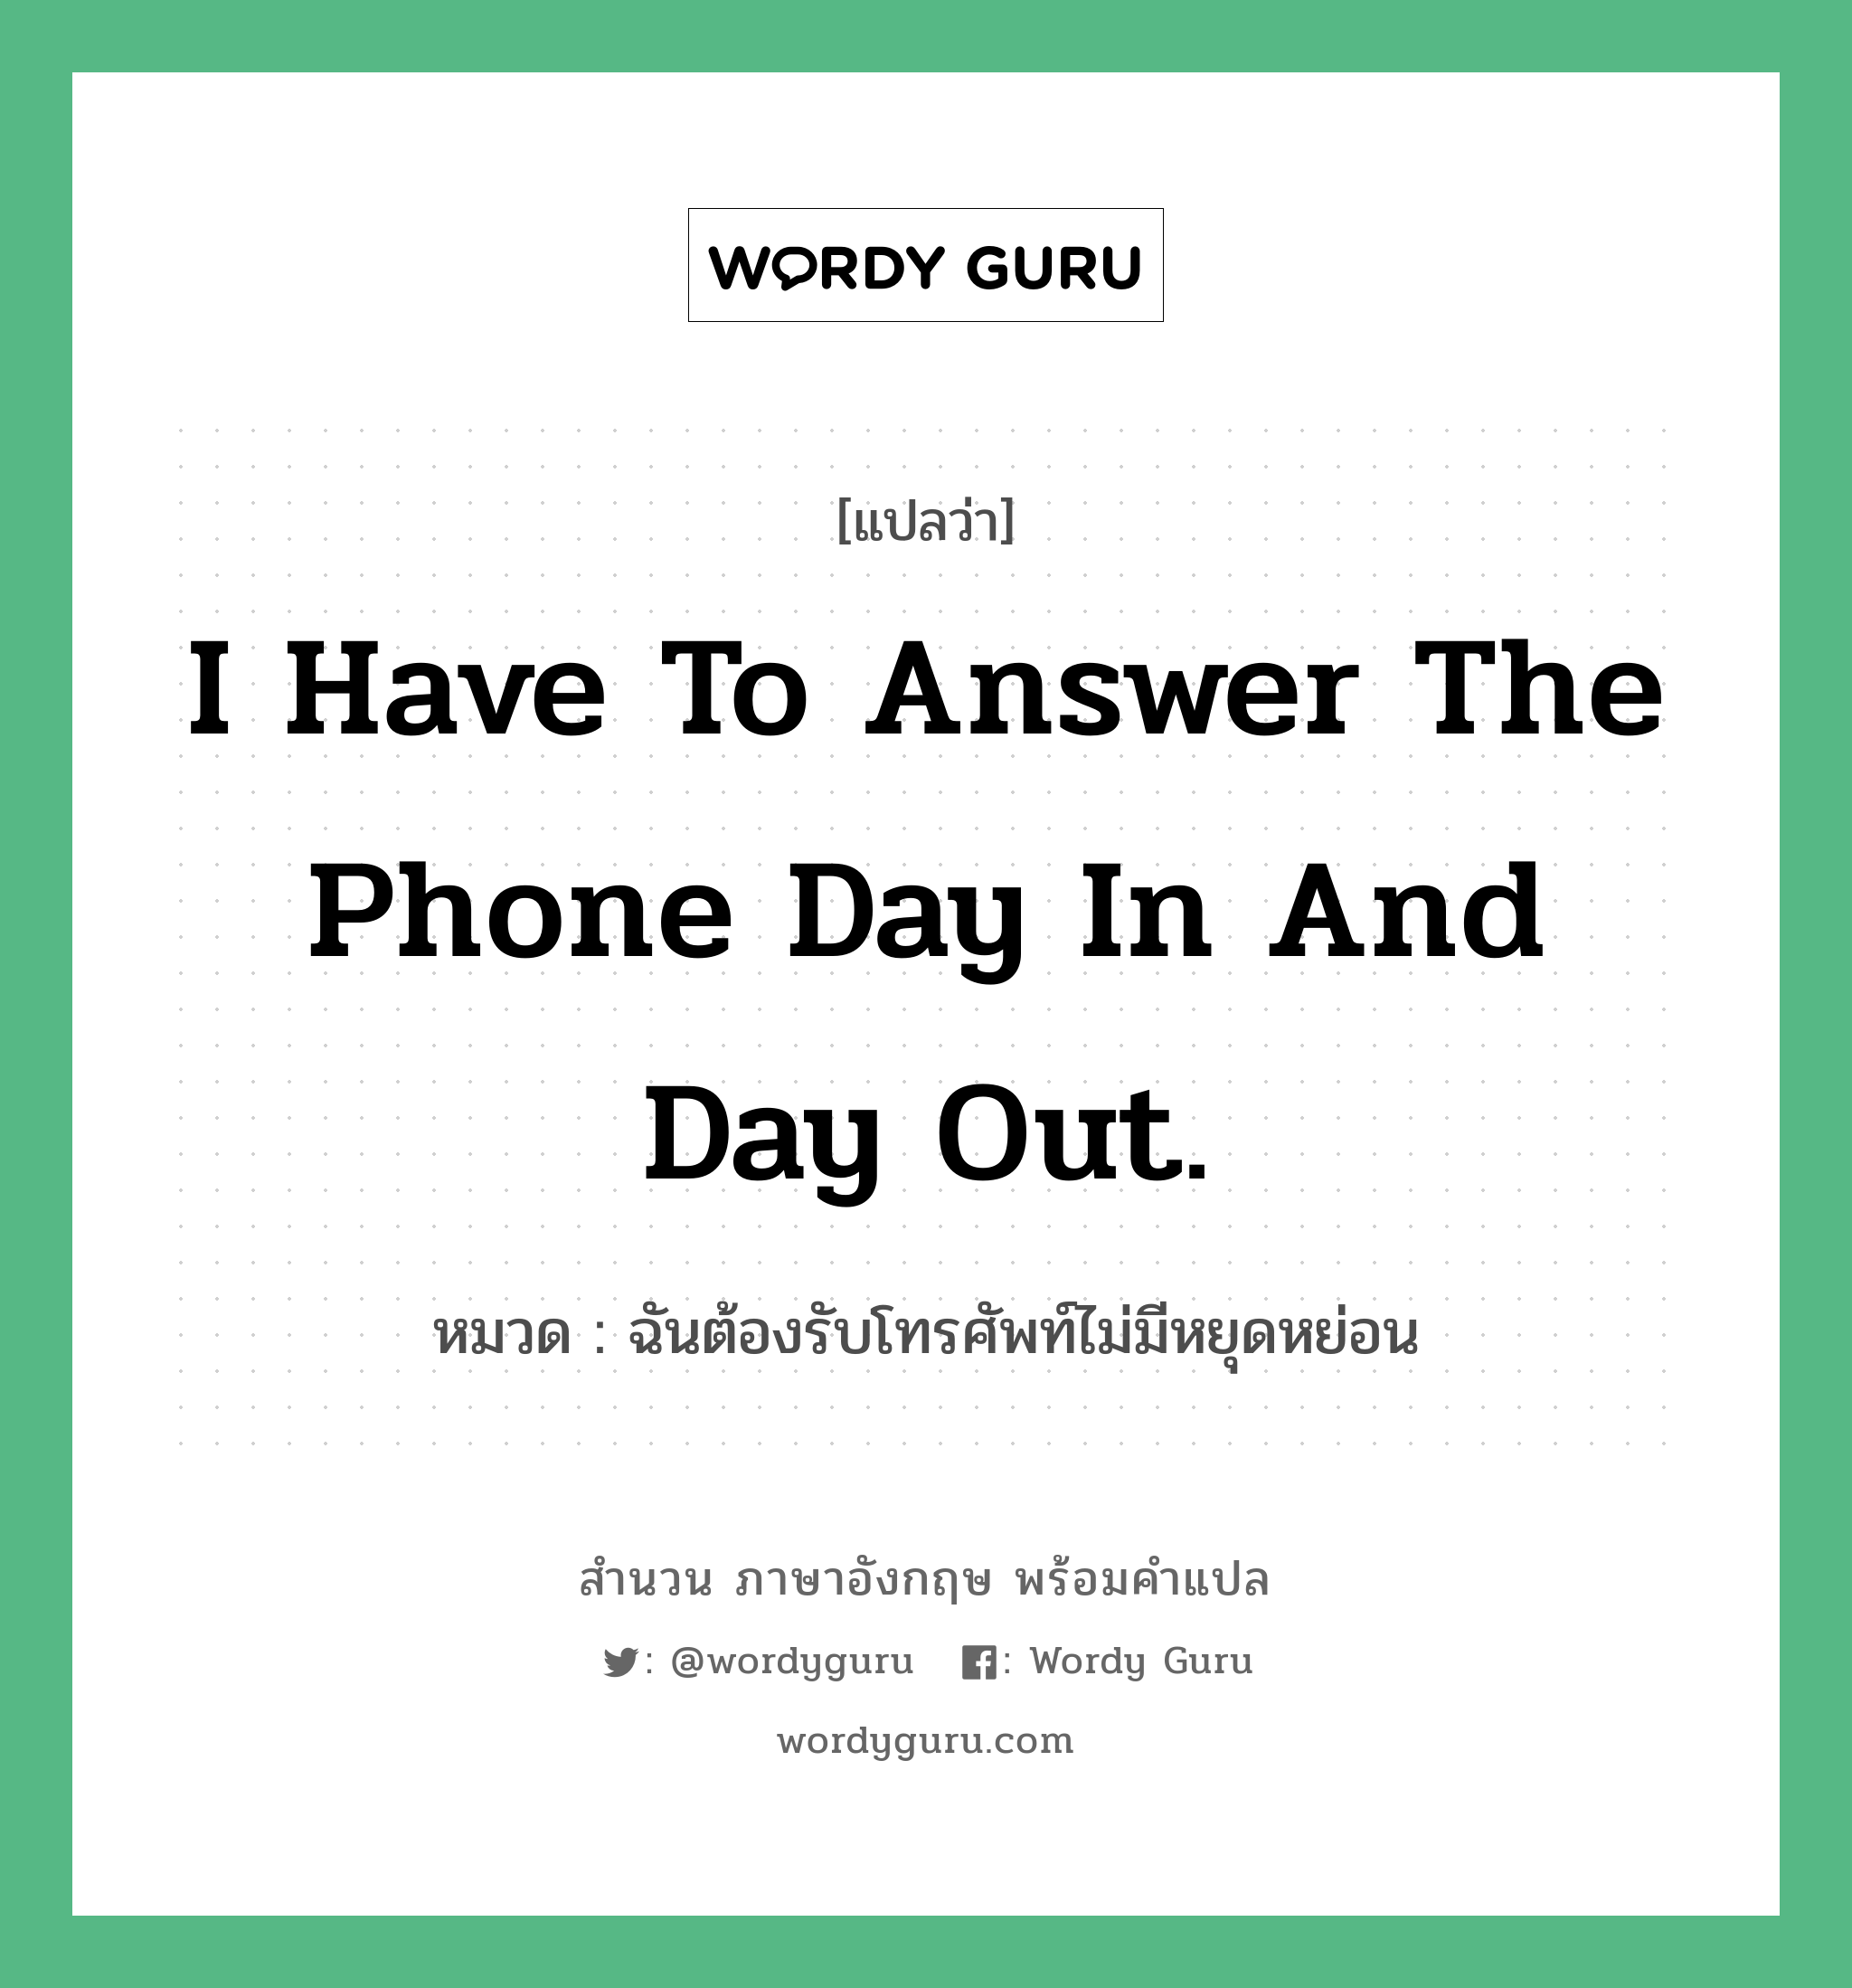 I have to answer the phone day in and day out. แปลว่า?, สำนวนภาษาอังกฤษ I have to answer the phone day in and day out. หมวด ฉันต้องรับโทรศัพท์ไม่มีหยุดหย่อน